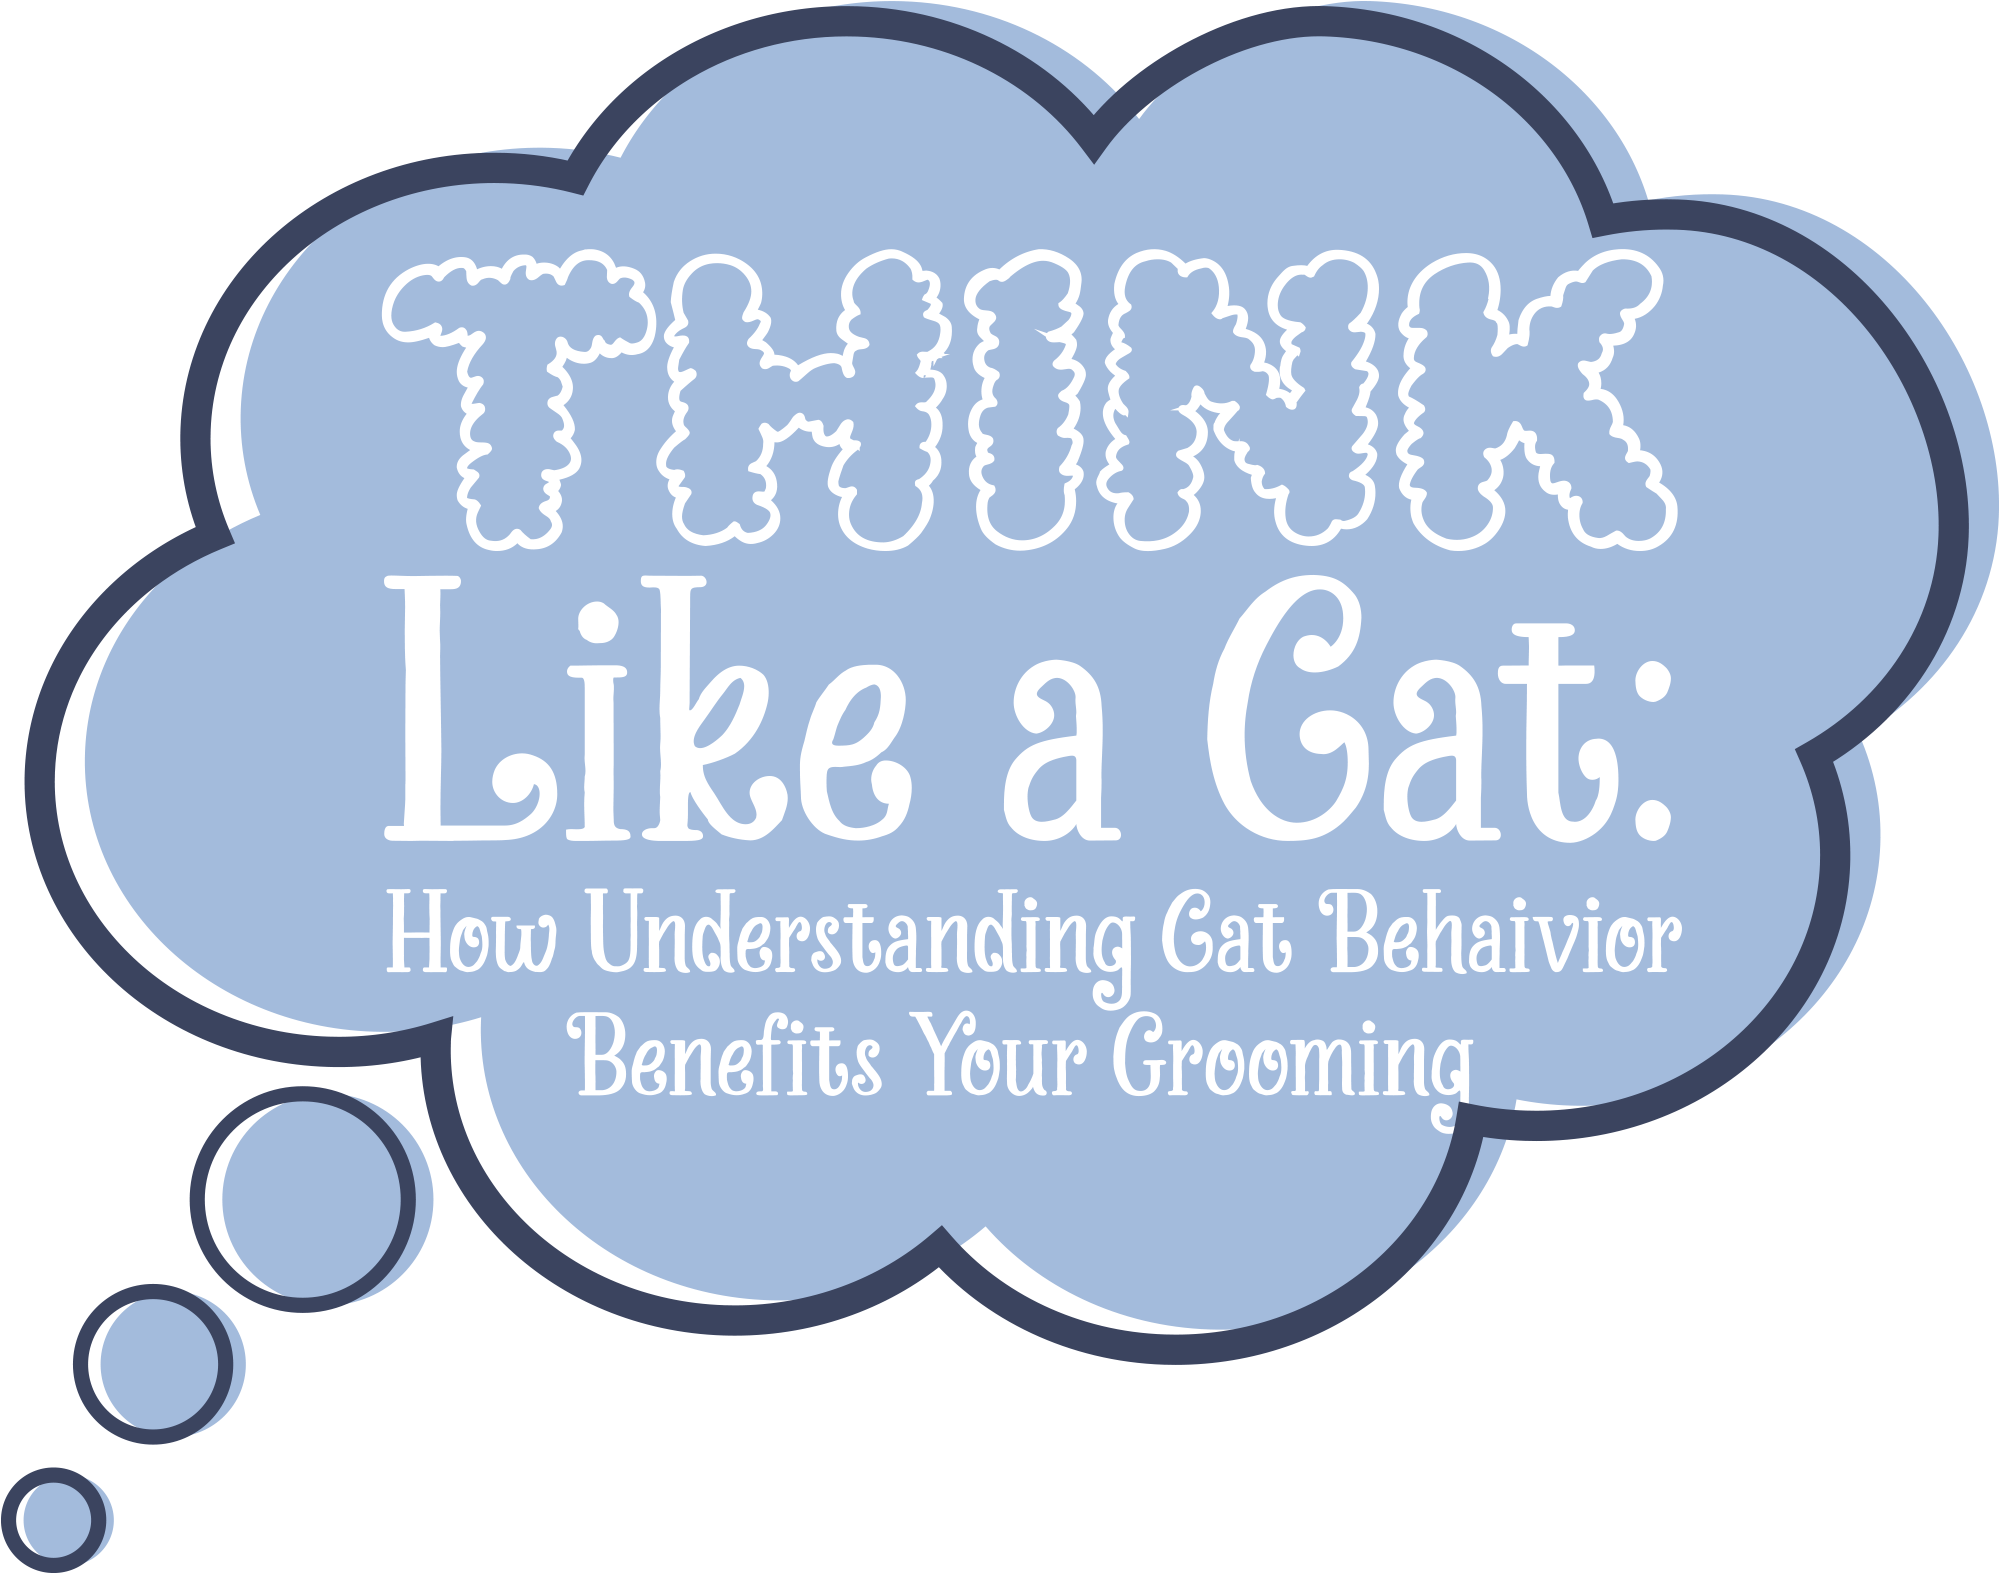 image title "Think like a cat"